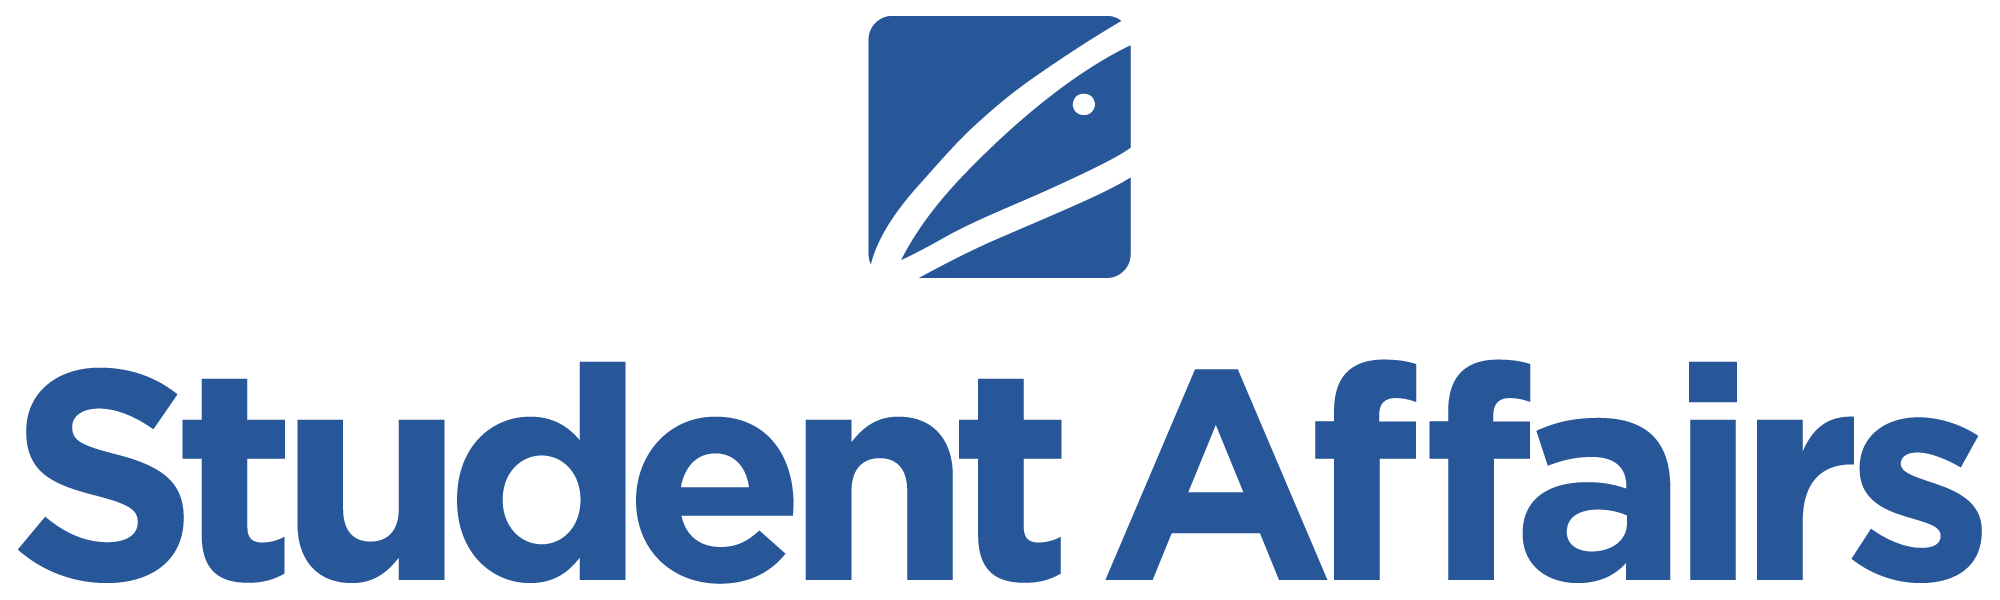 Student Affairs Icon/Link